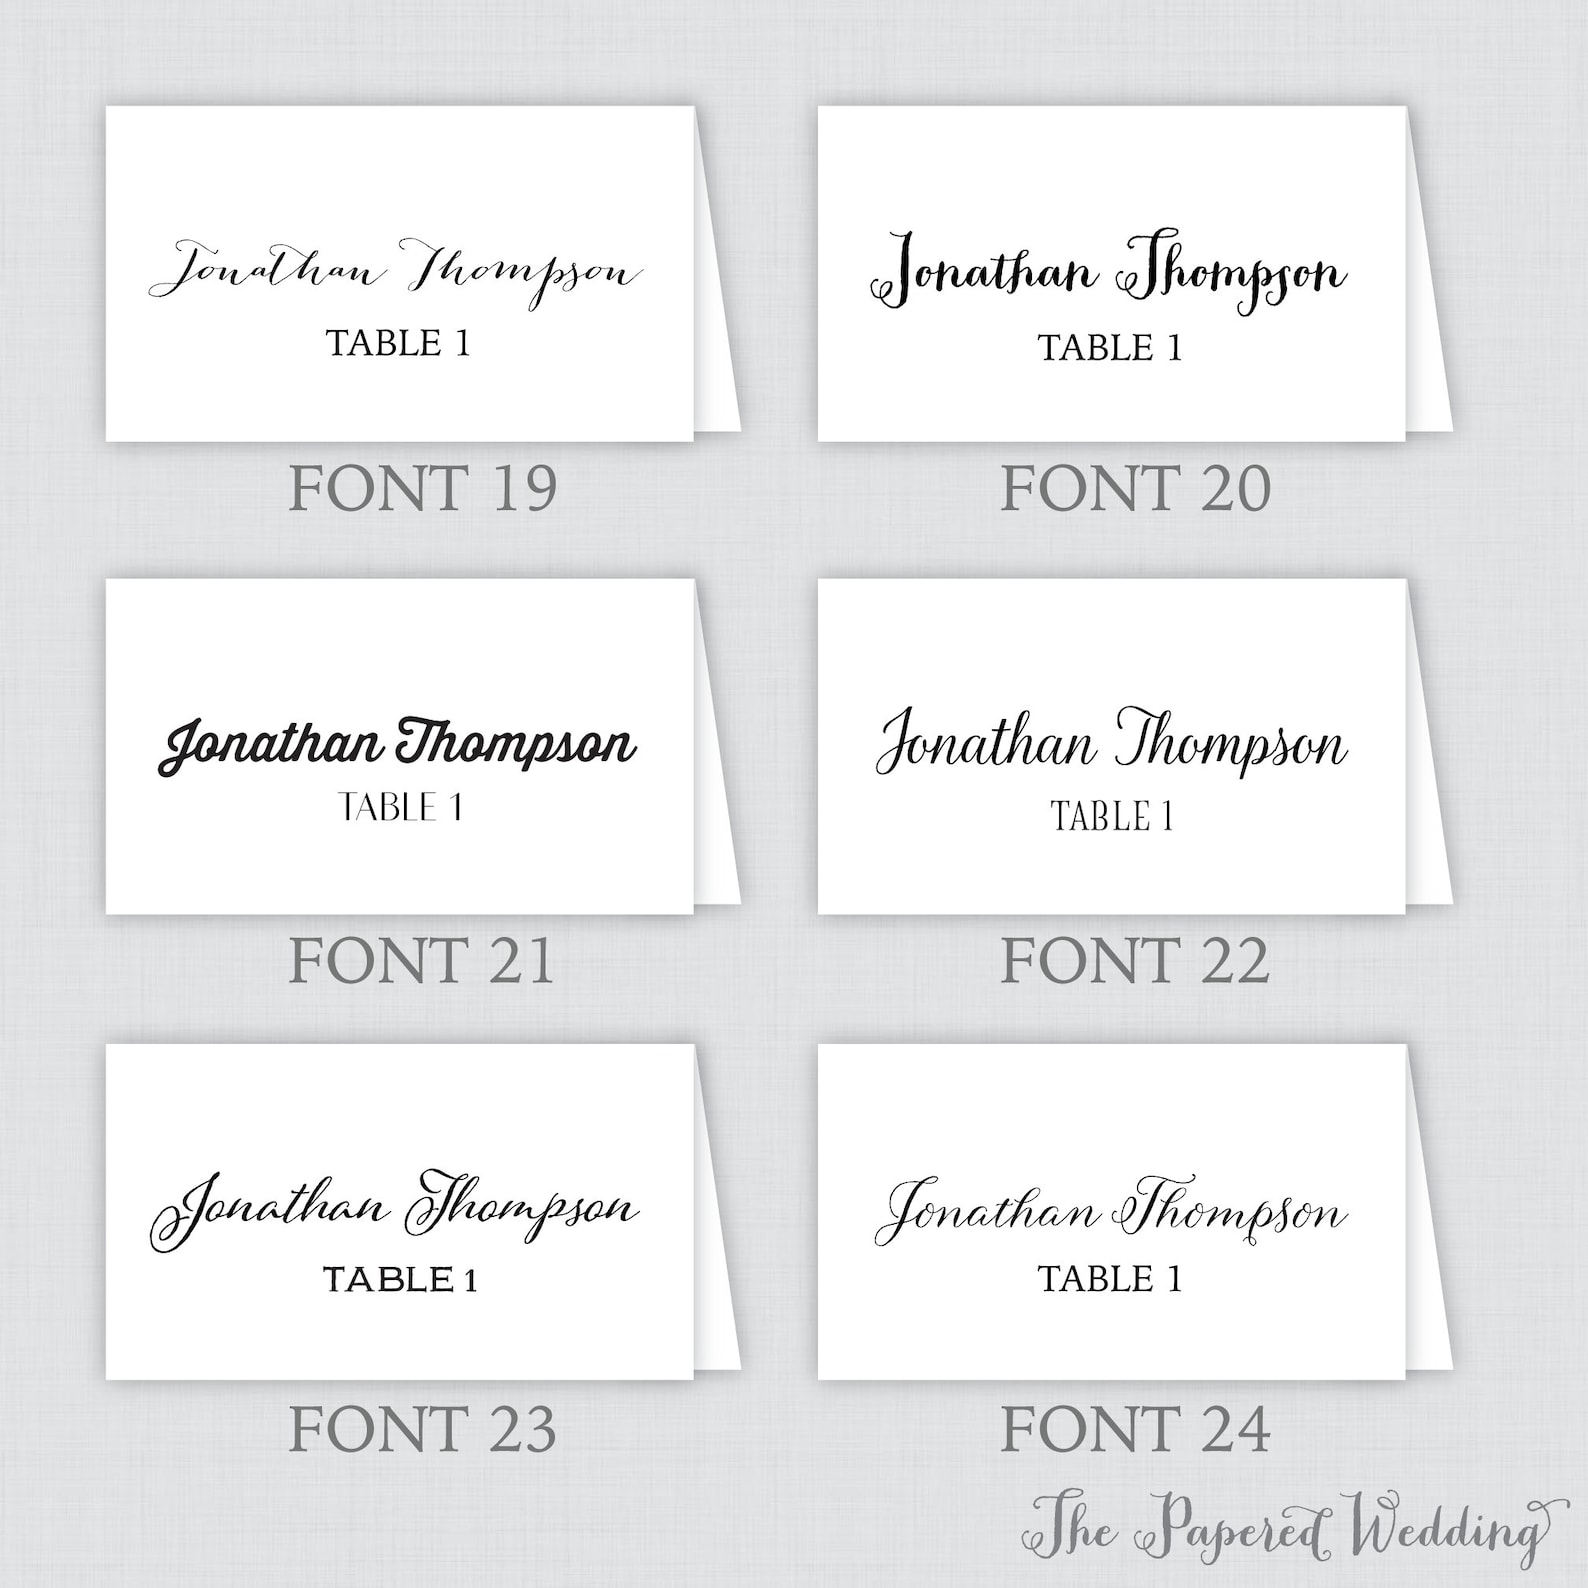 printed-place-cards-with-custom-fonts-and-colors-customized-etsy